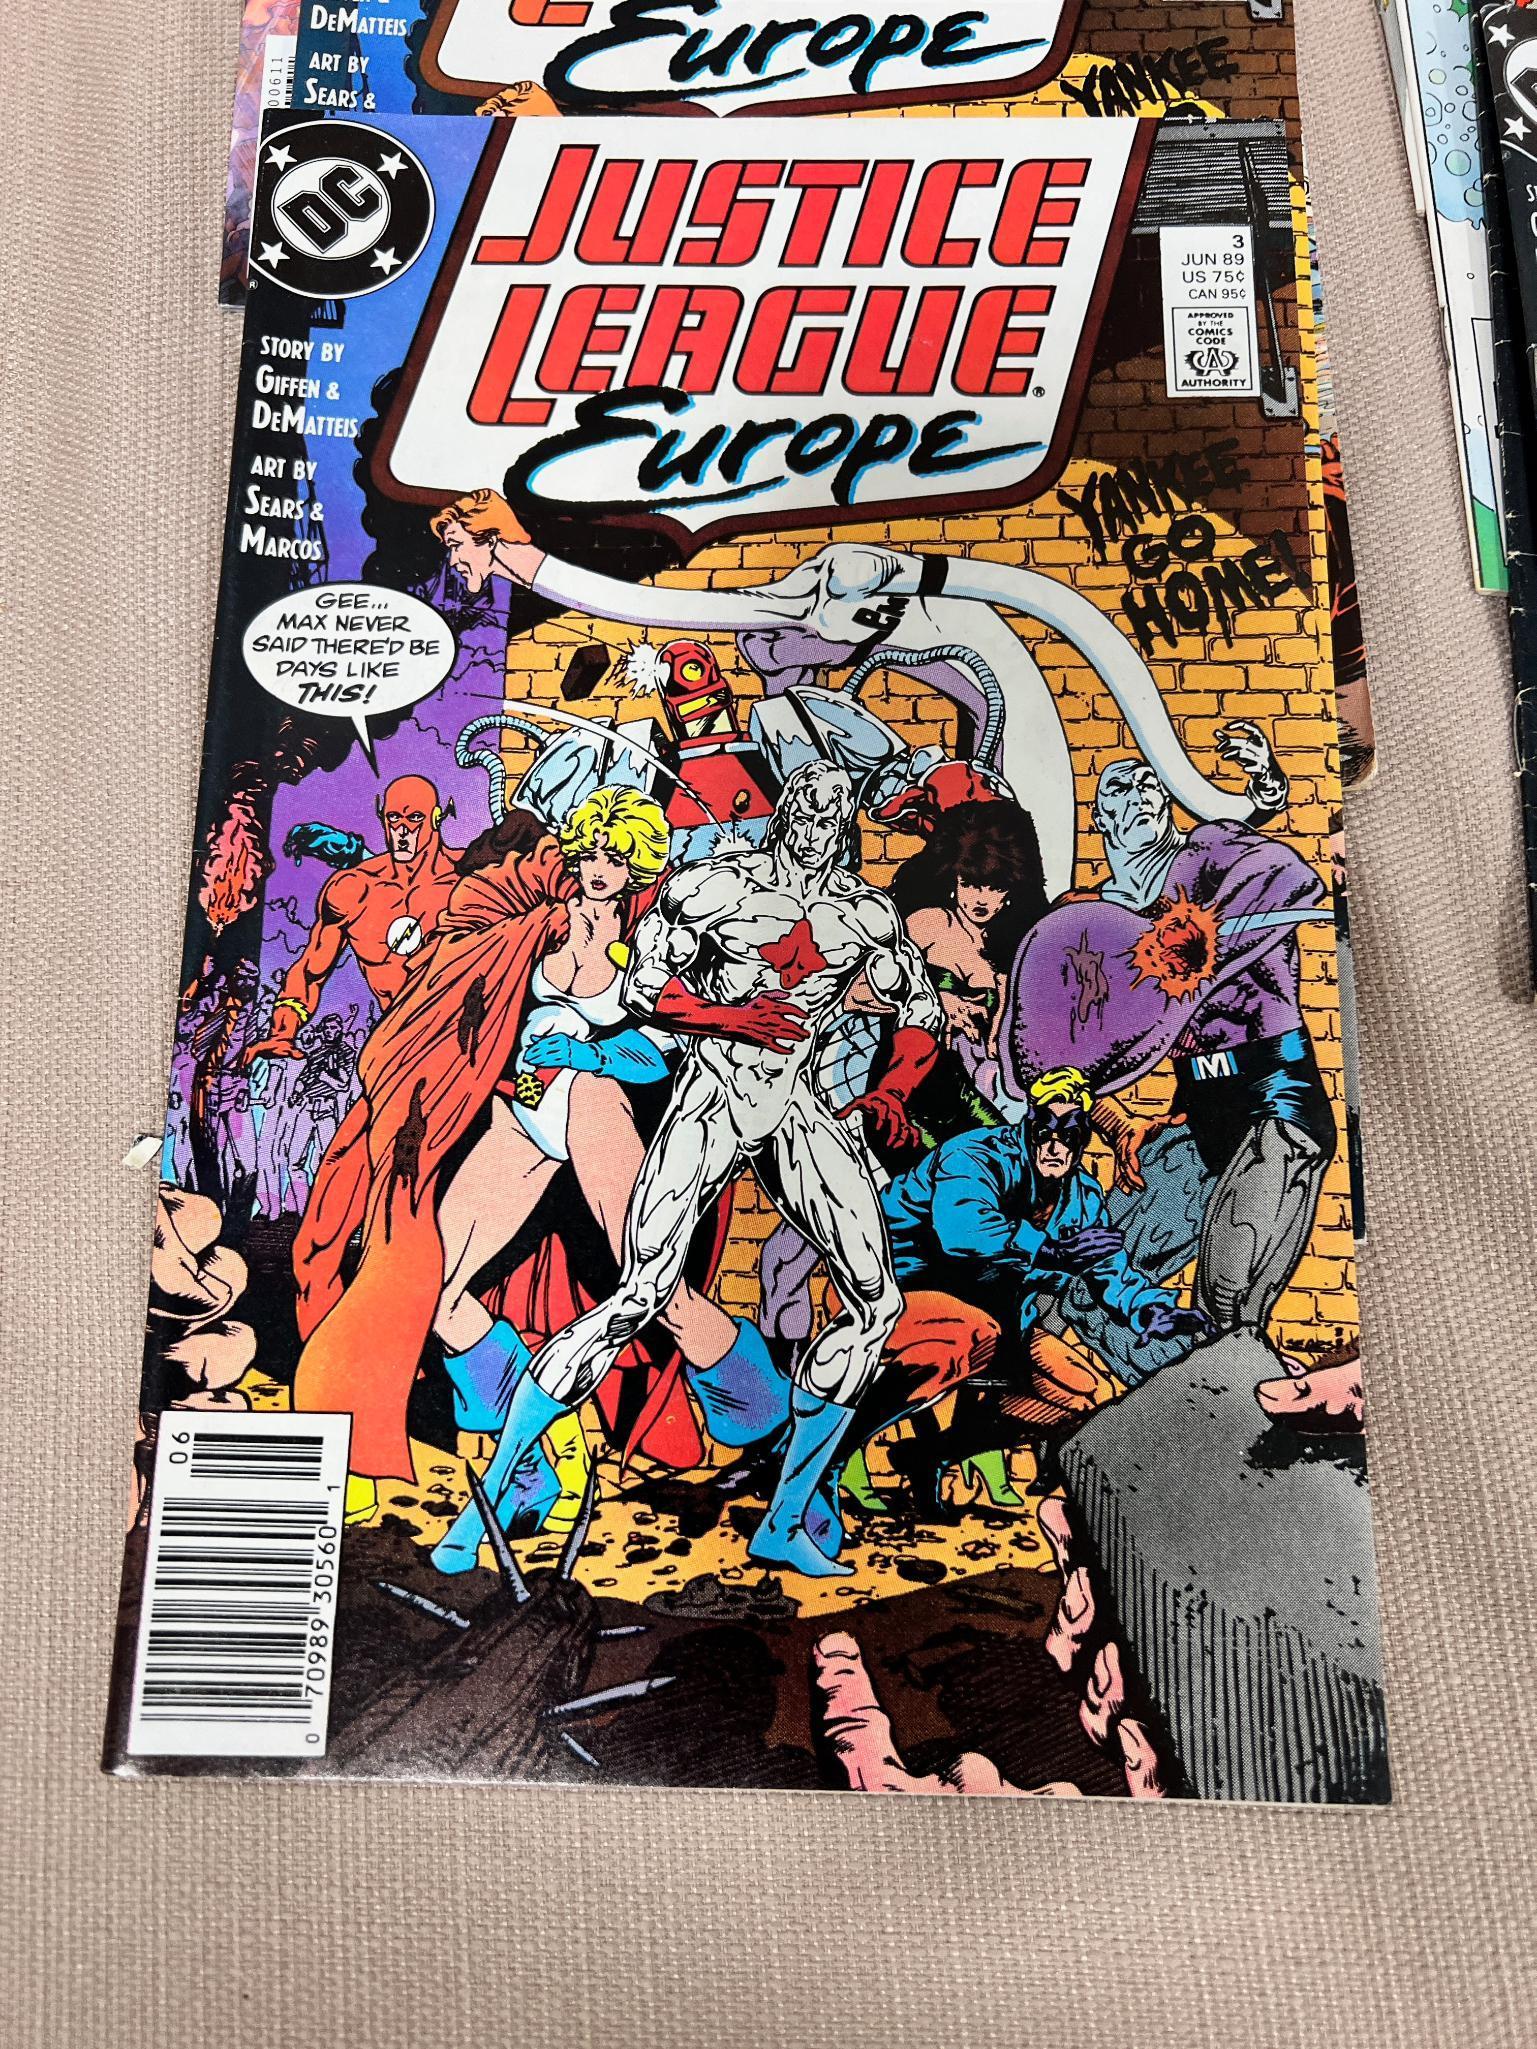 Justice League Europe, West Coast Avengers, Green Lantern and more